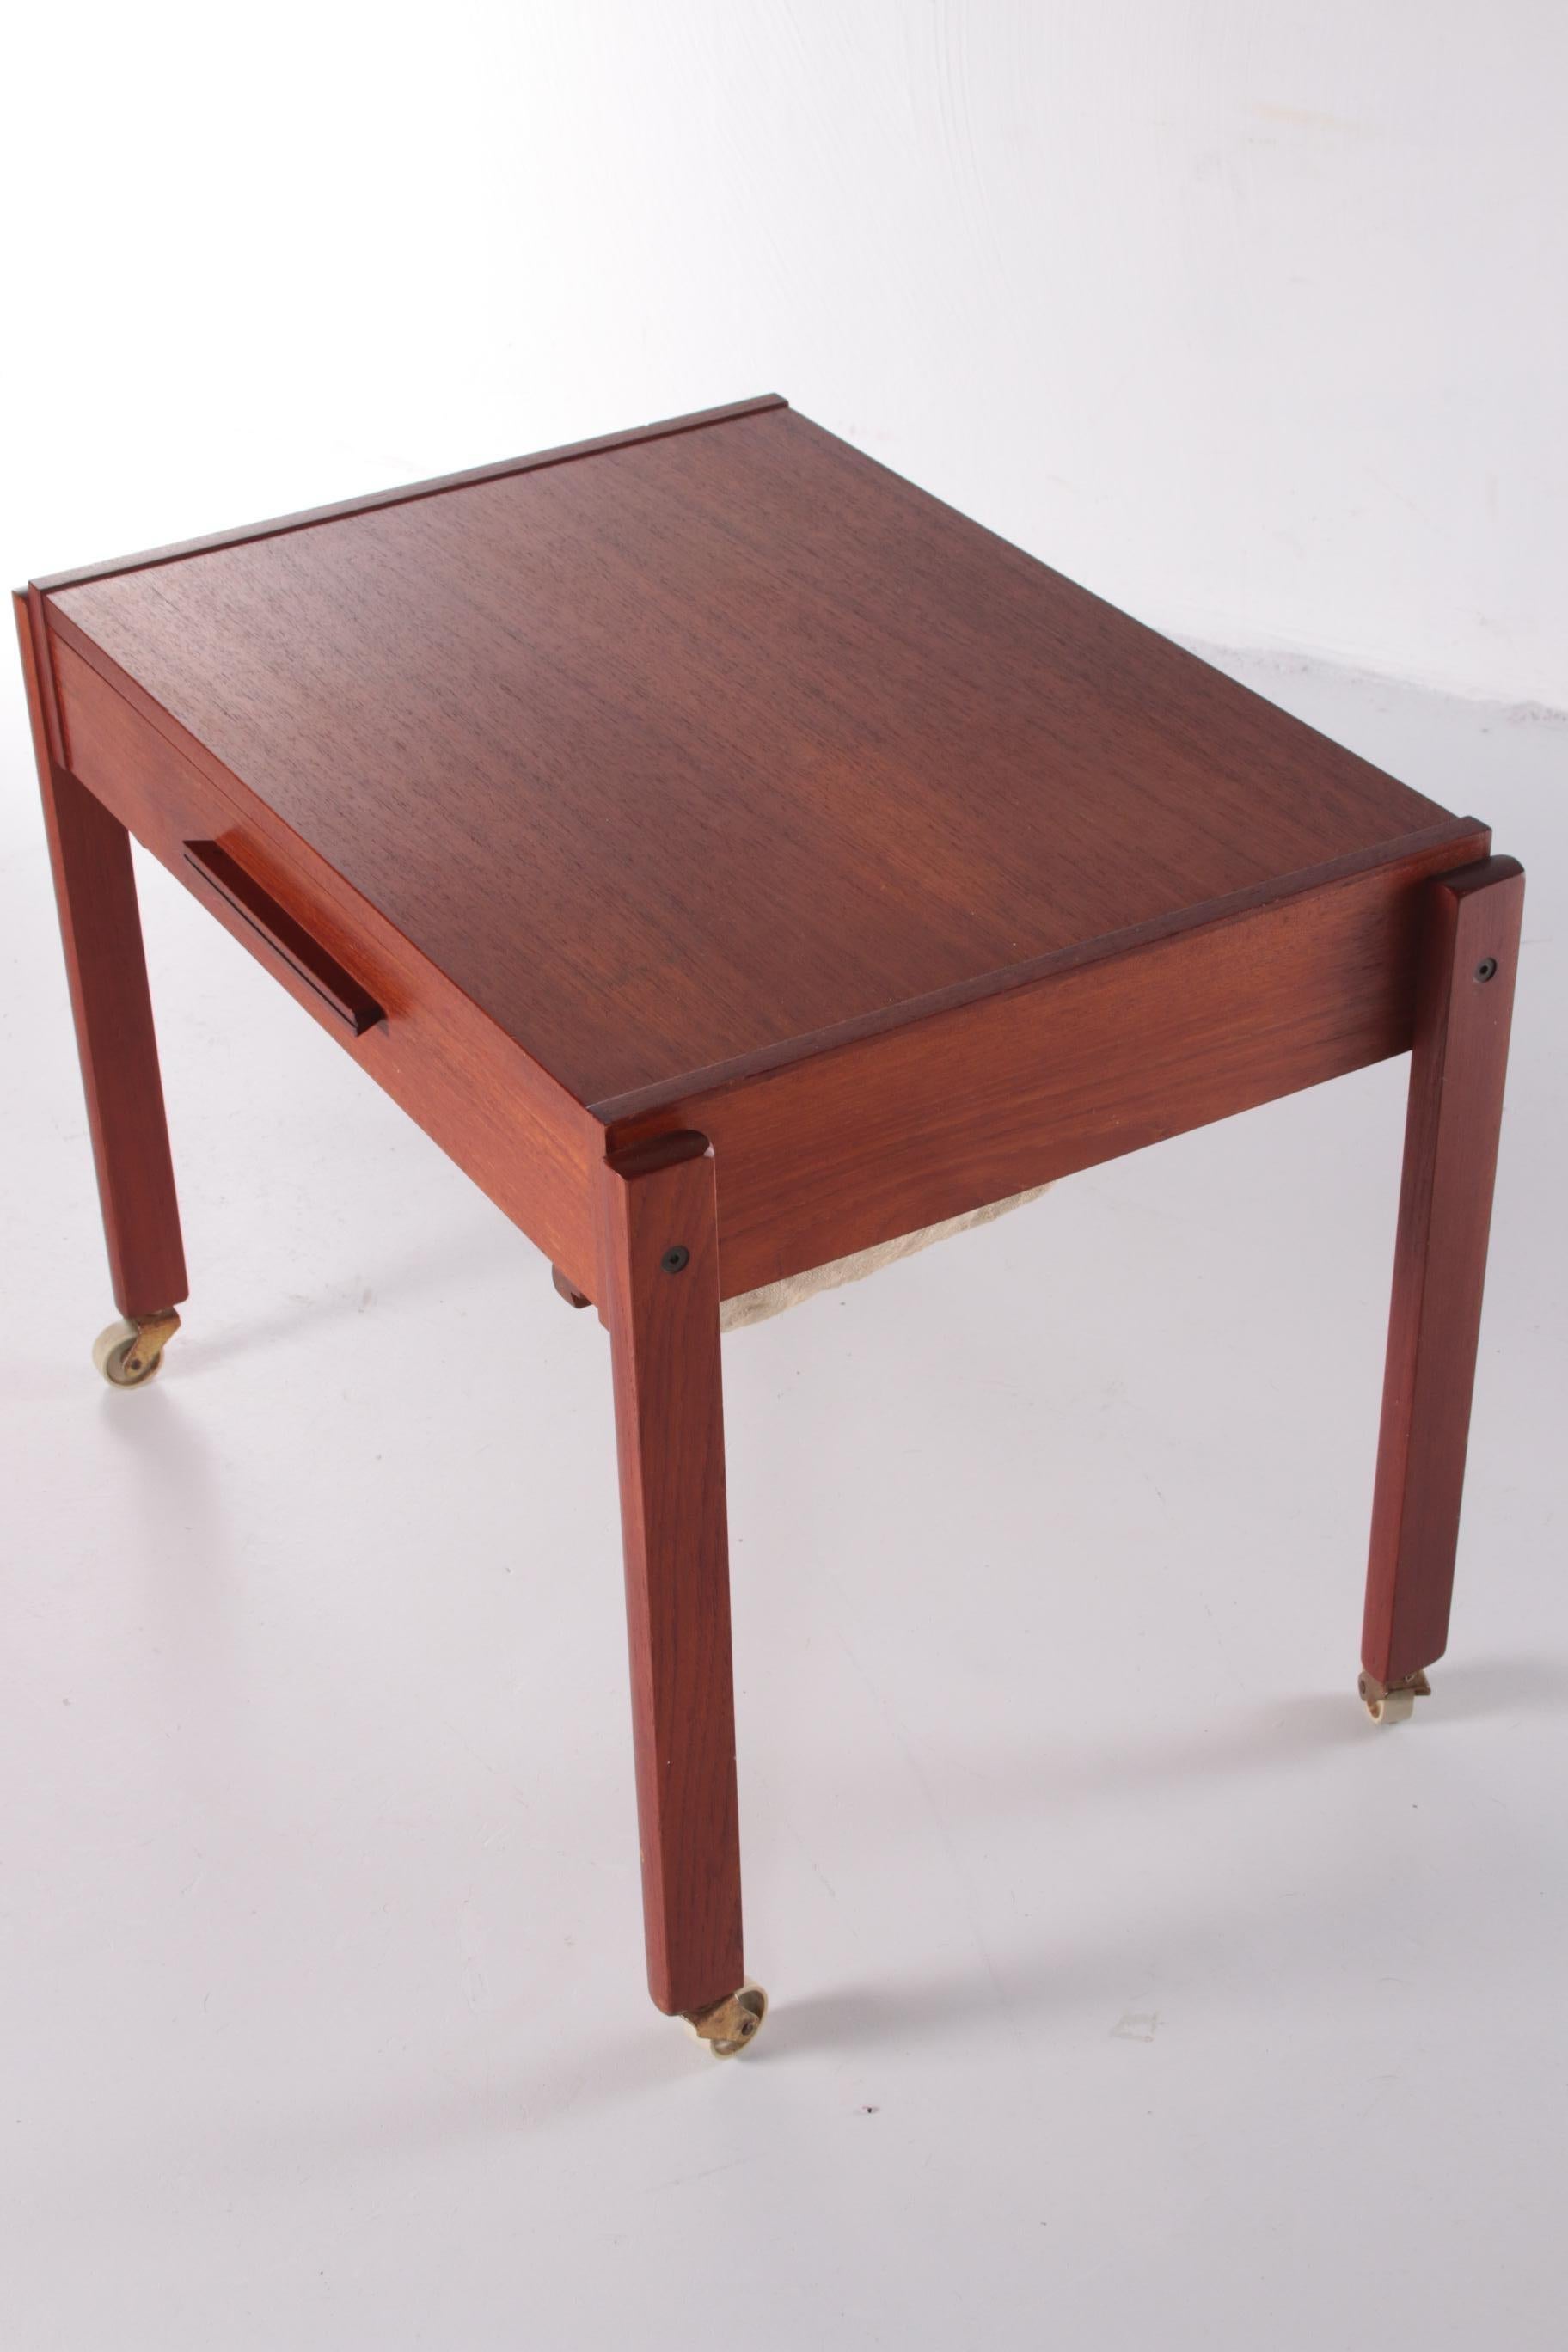 Danish Teak Side Table with Drawers on Wheels For Sale 5